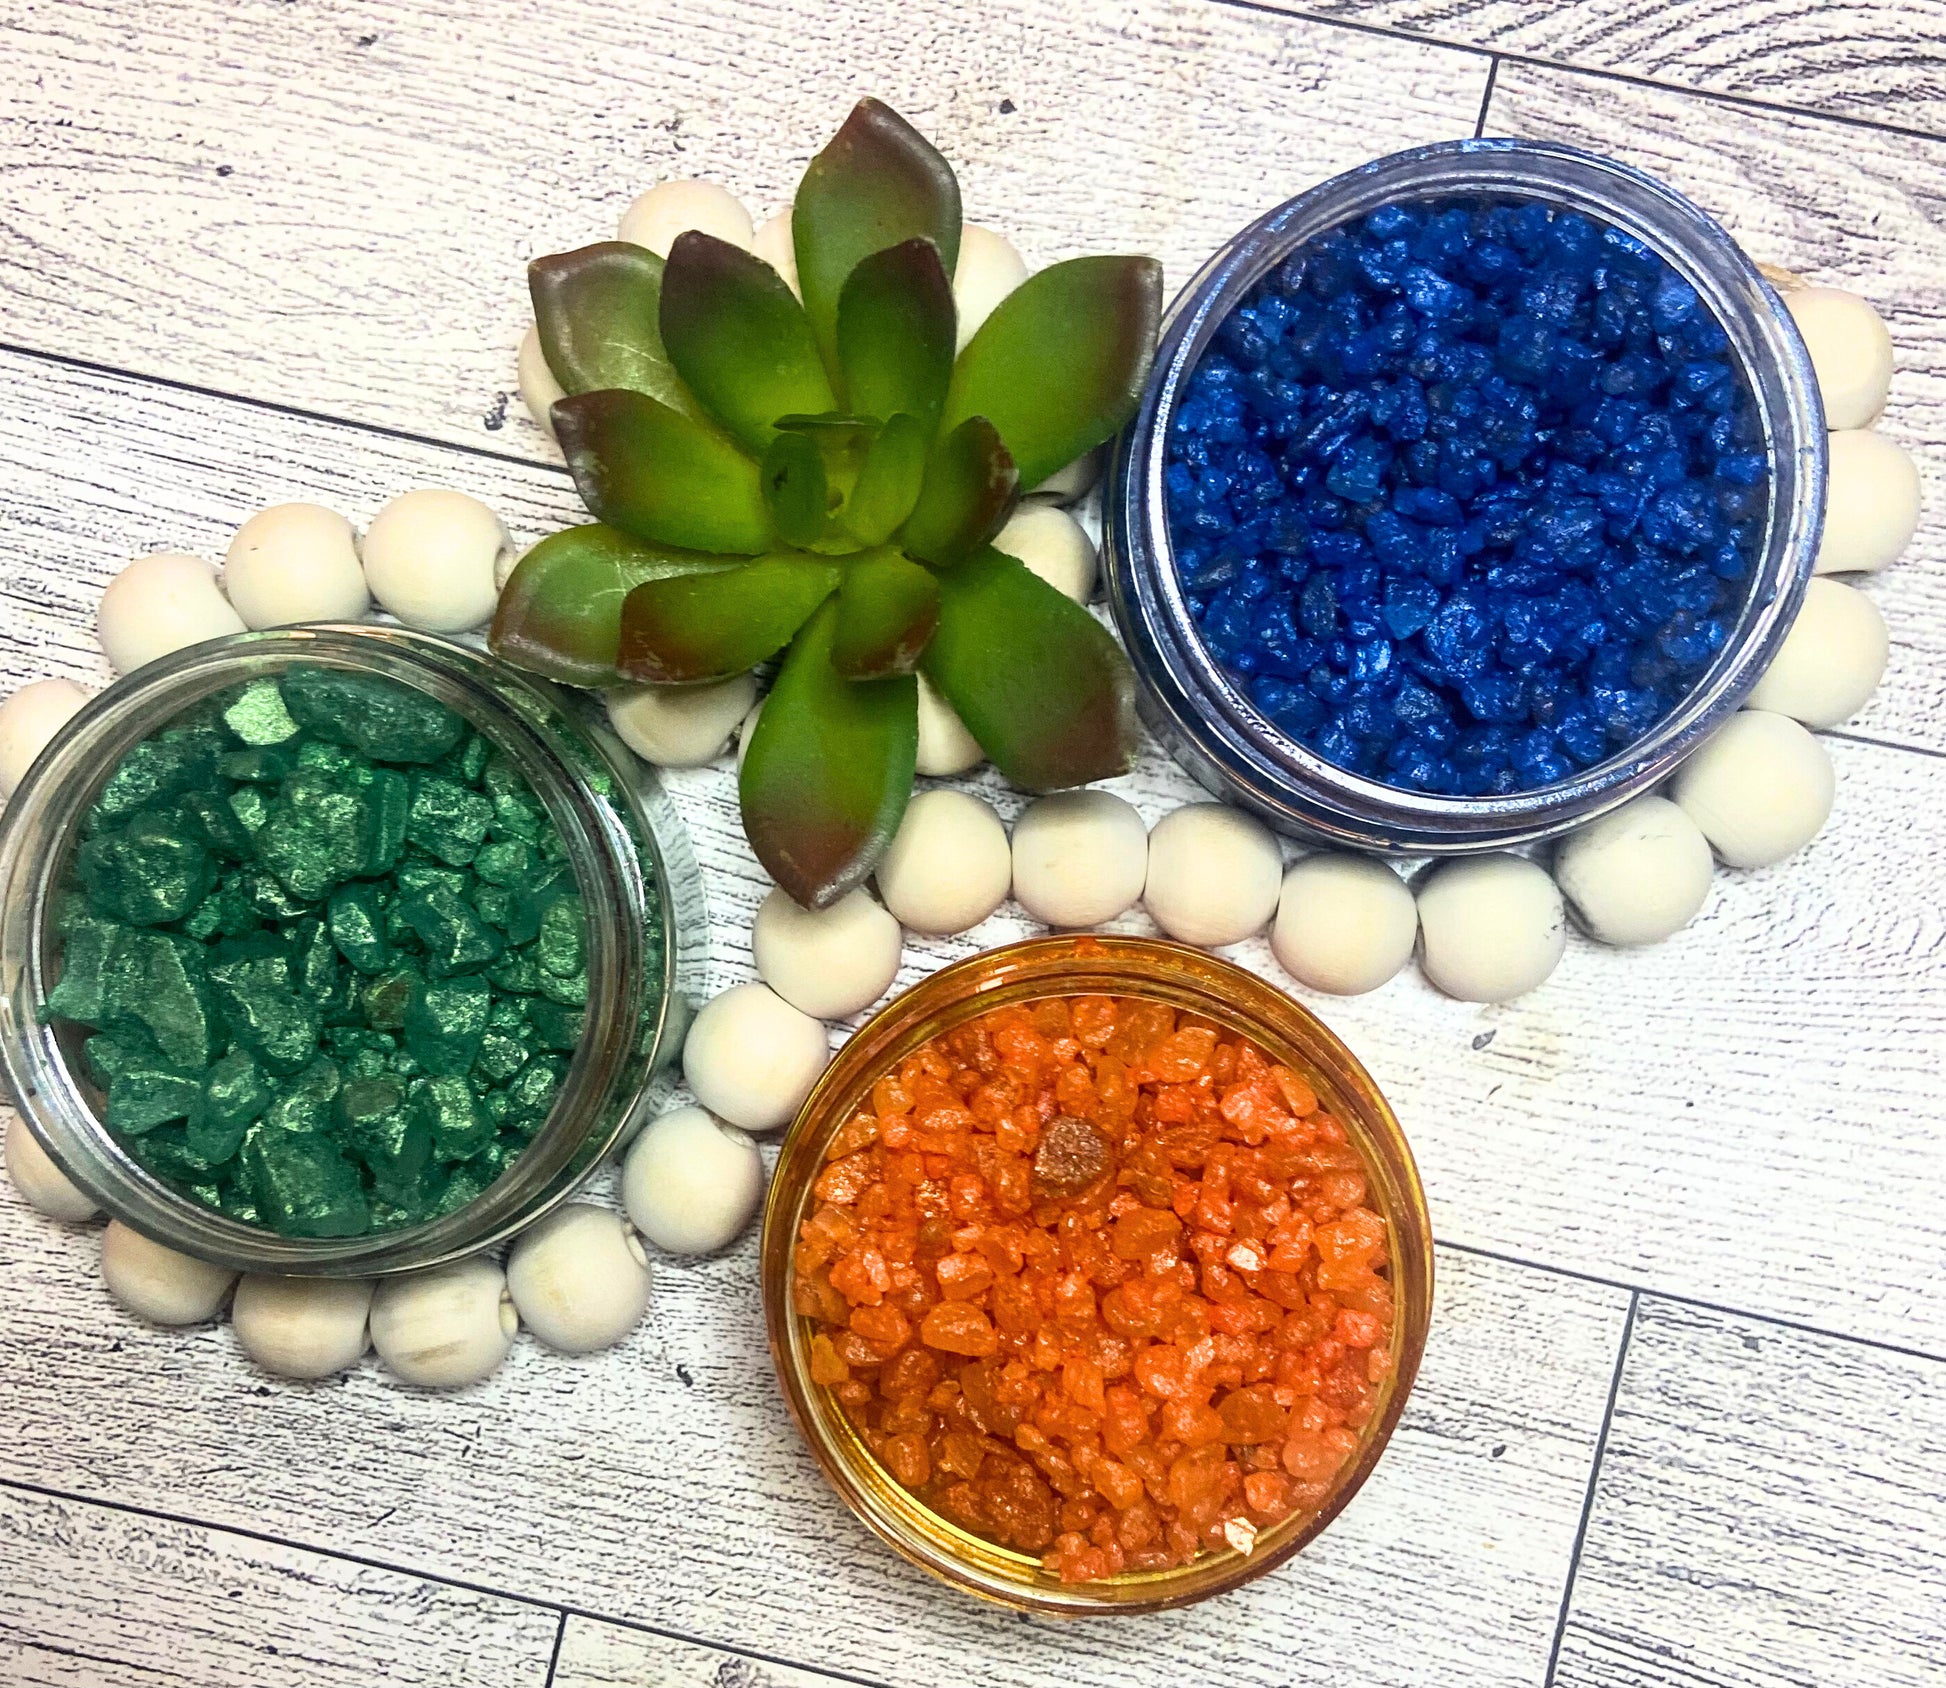 Elevate your home's ambiance with our highly fragrant Boss Wick Aroma Bits! Experience the delightful scent of our scented crystals in a variety of fragrances. Simply use with a tea light or electric warmer approved for wax melts. Easy clean up, no messy wax. Transform any space into a cozy oasis.